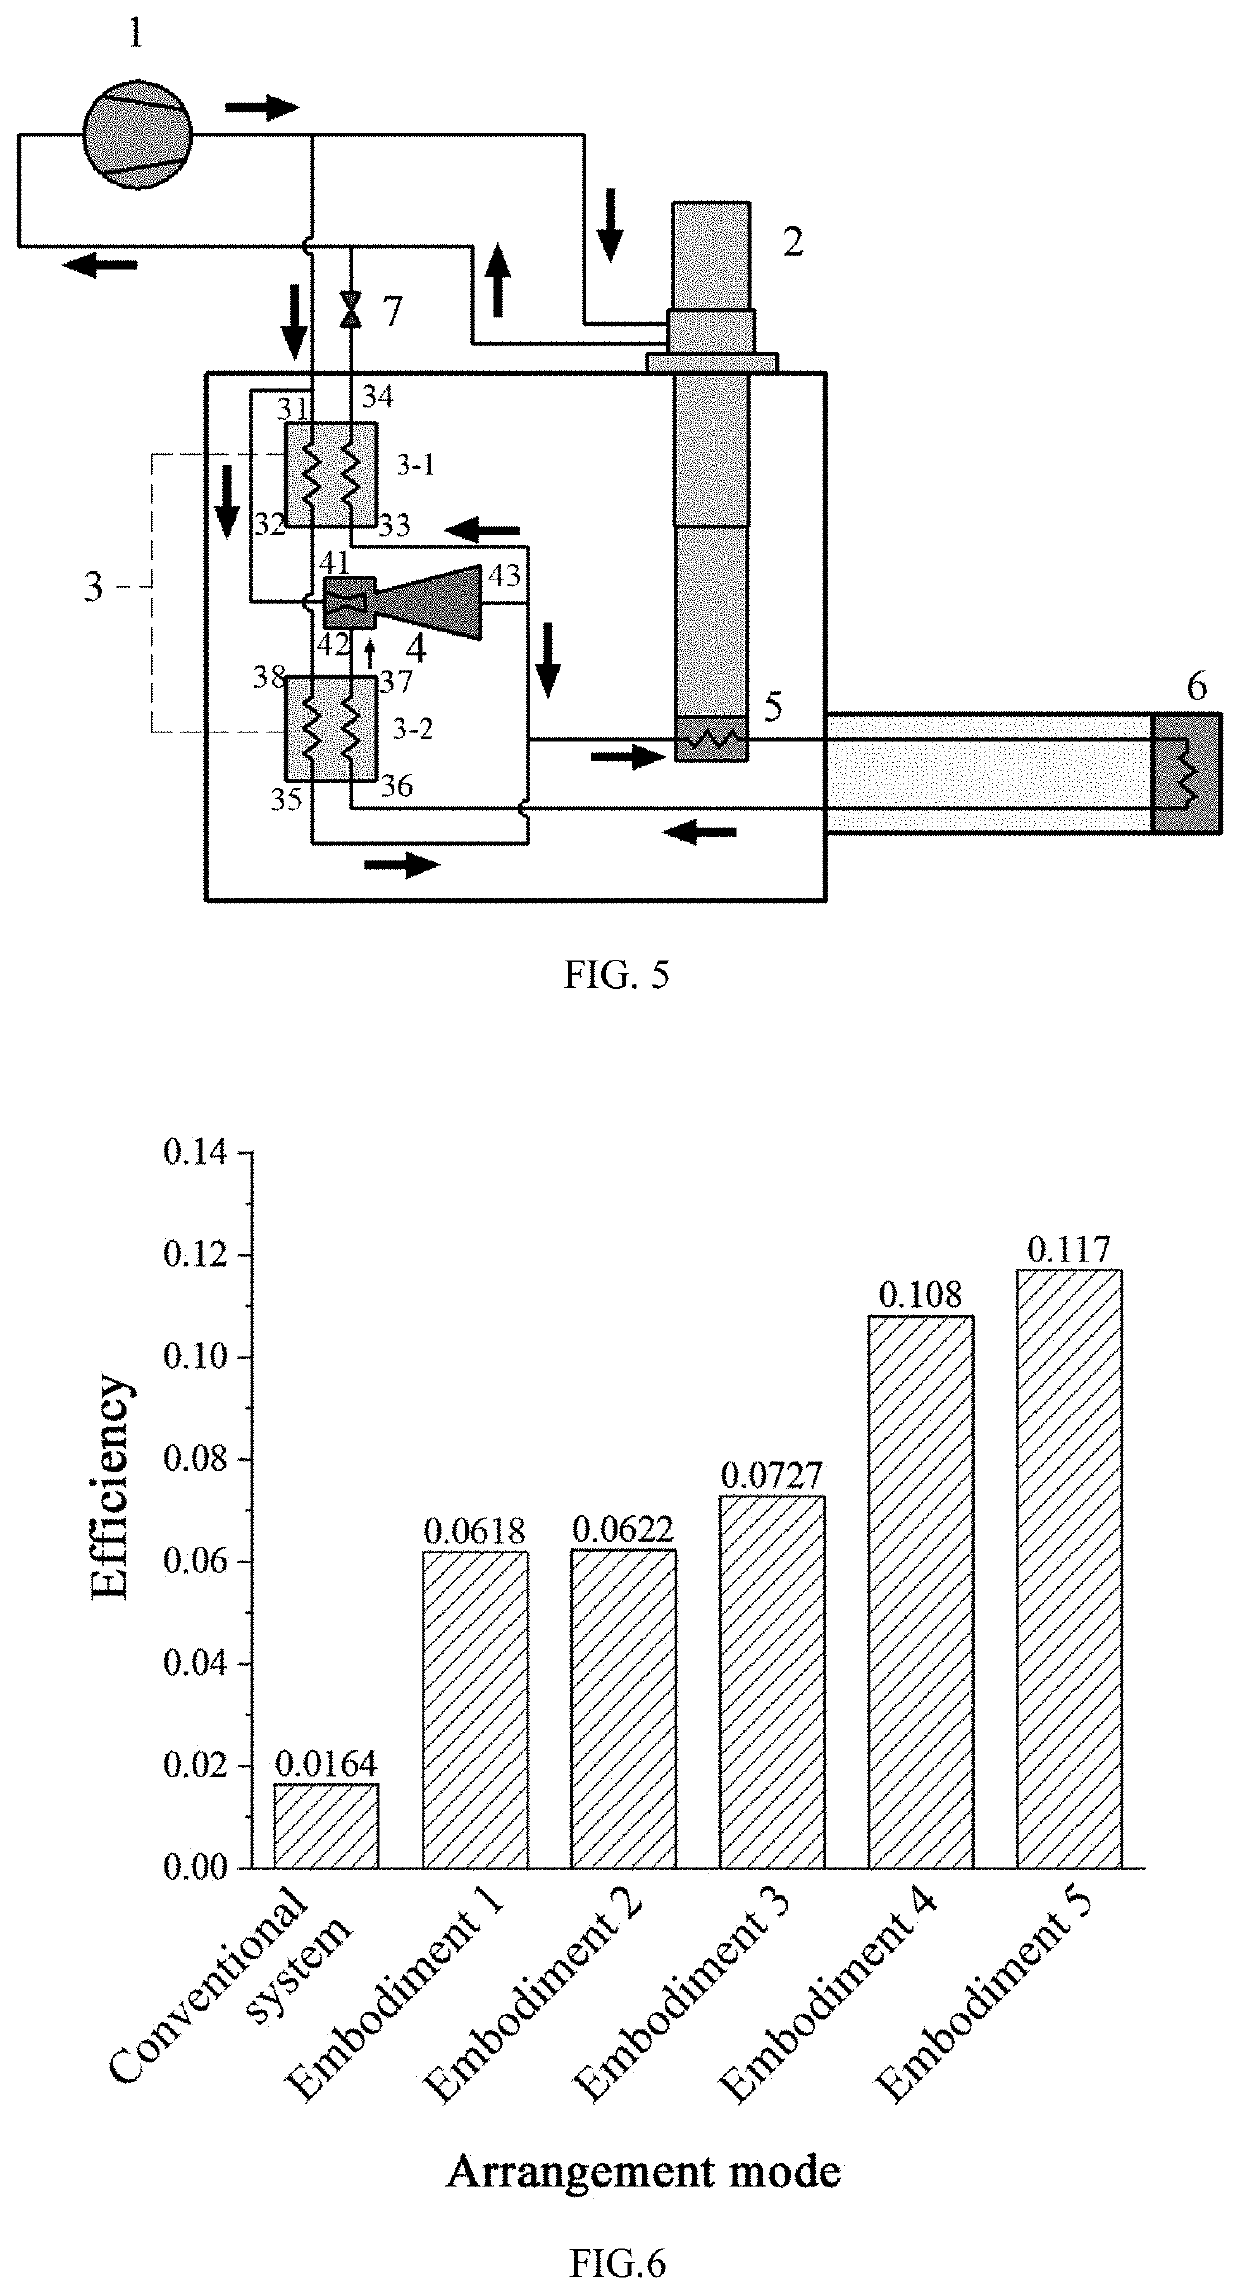 Ejector-based cryogenic refrigeration system for cold energy recovery